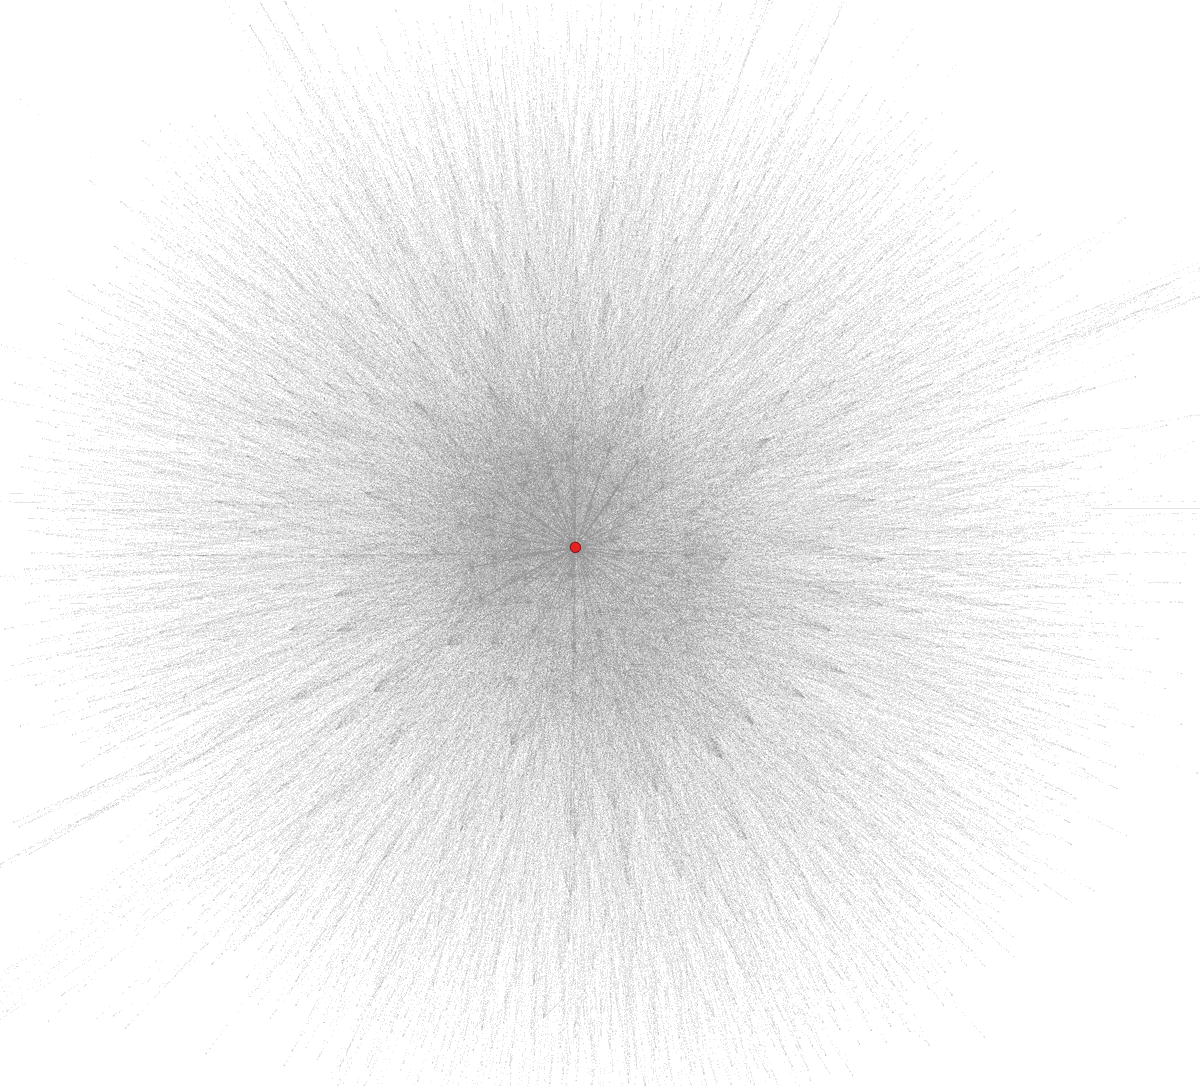 Using DMI-TCAT &  @GEPHI, I analysed 51k Tweets & over 2k users. What u see here is a social graph by mentions (directed). If 1 user mentions another, a link is created. The more mentions the stronger the link. Red dot is shop_mask_usa - the most mentioned acc